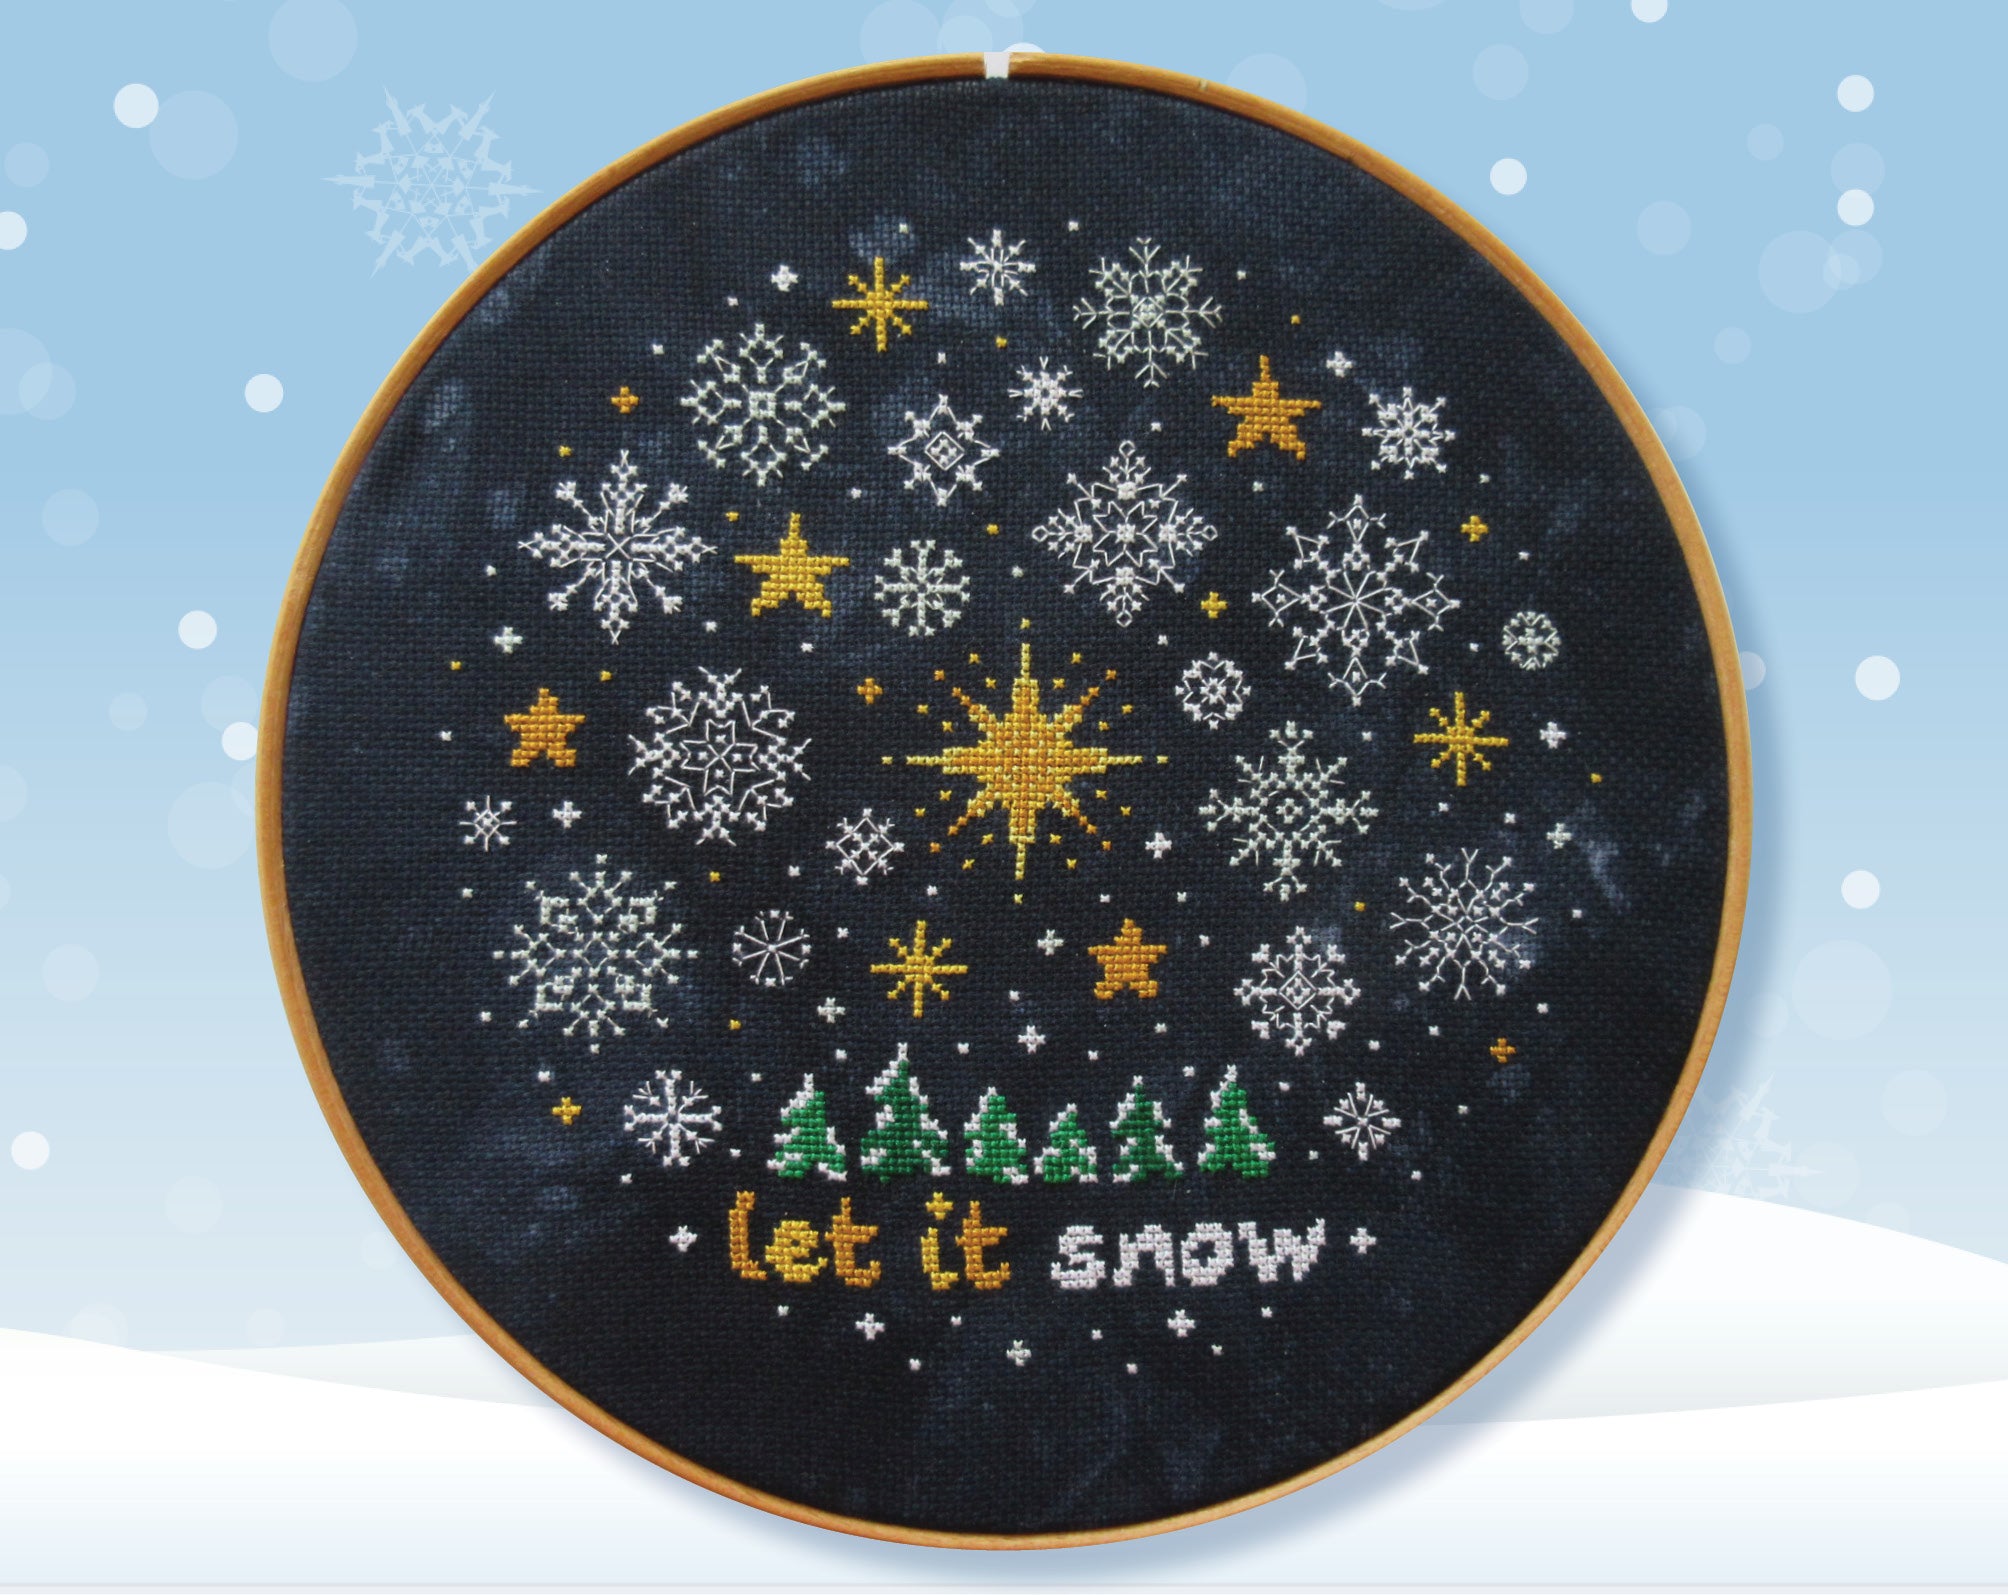 Snowflakes and Stars cross stitch pattern. Intricate snowflakes and golden stars surrounding a large eight-pointed star, all above little snow-capped trees and the words 'let it snow'.